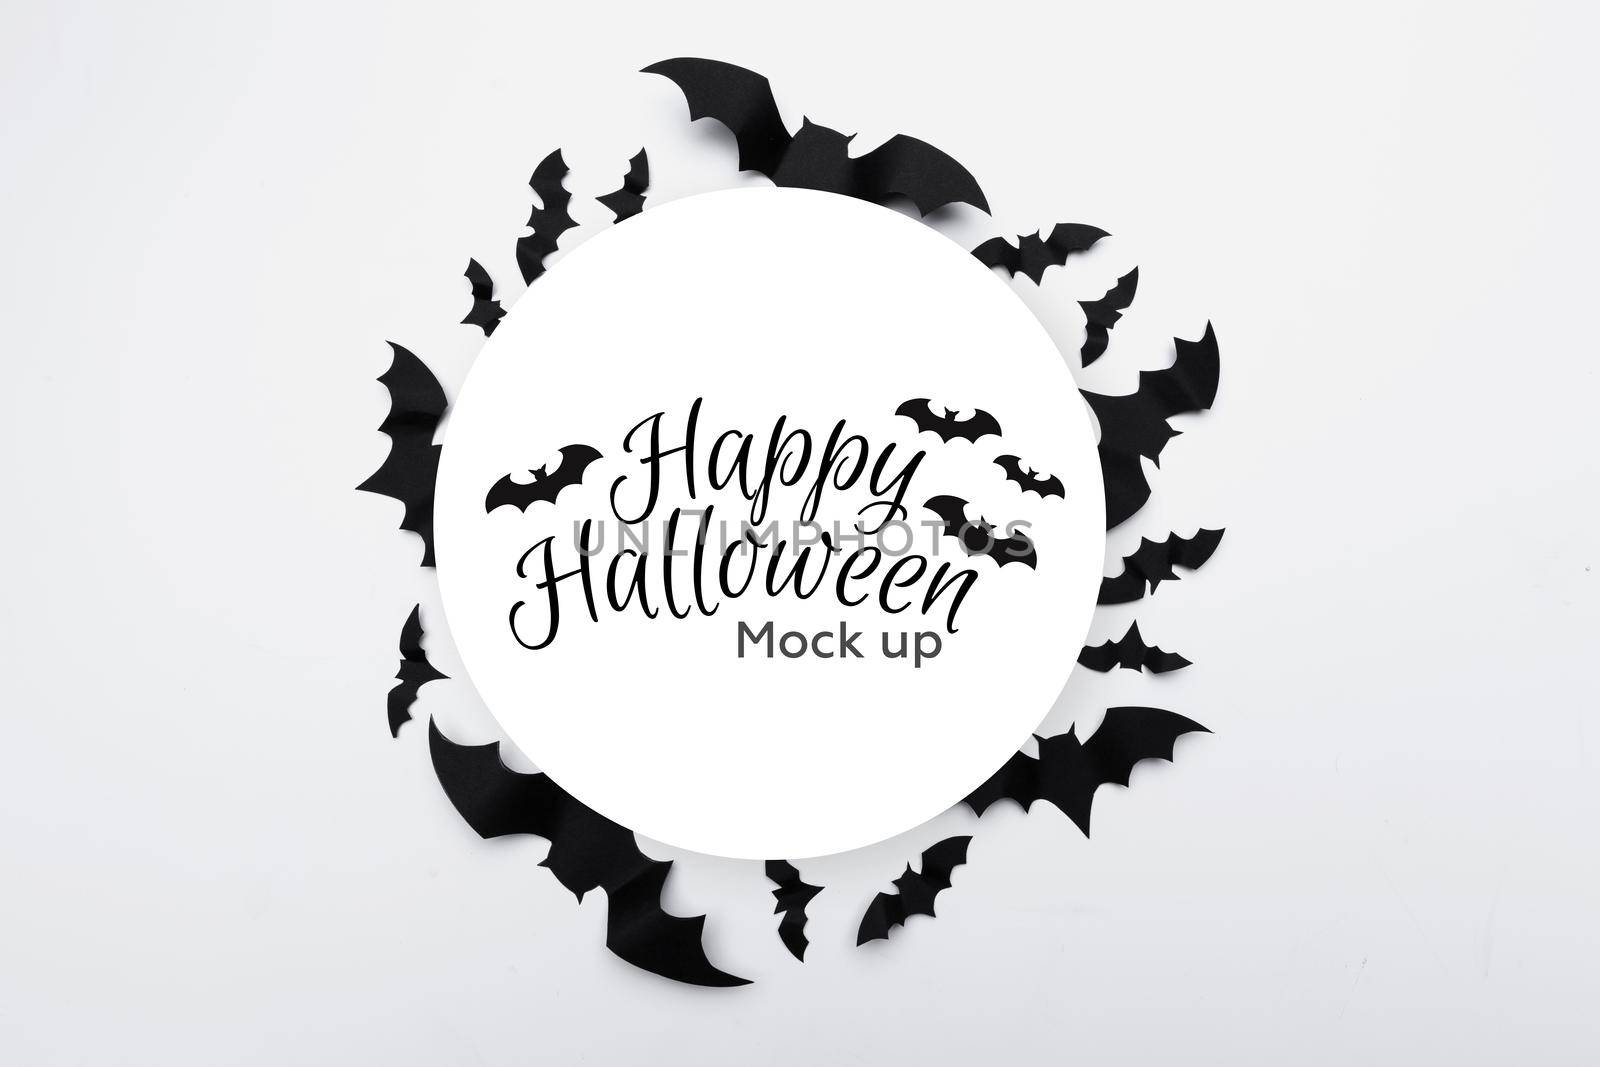 Halloween concept - paper bats on white background by Fabrikasimf